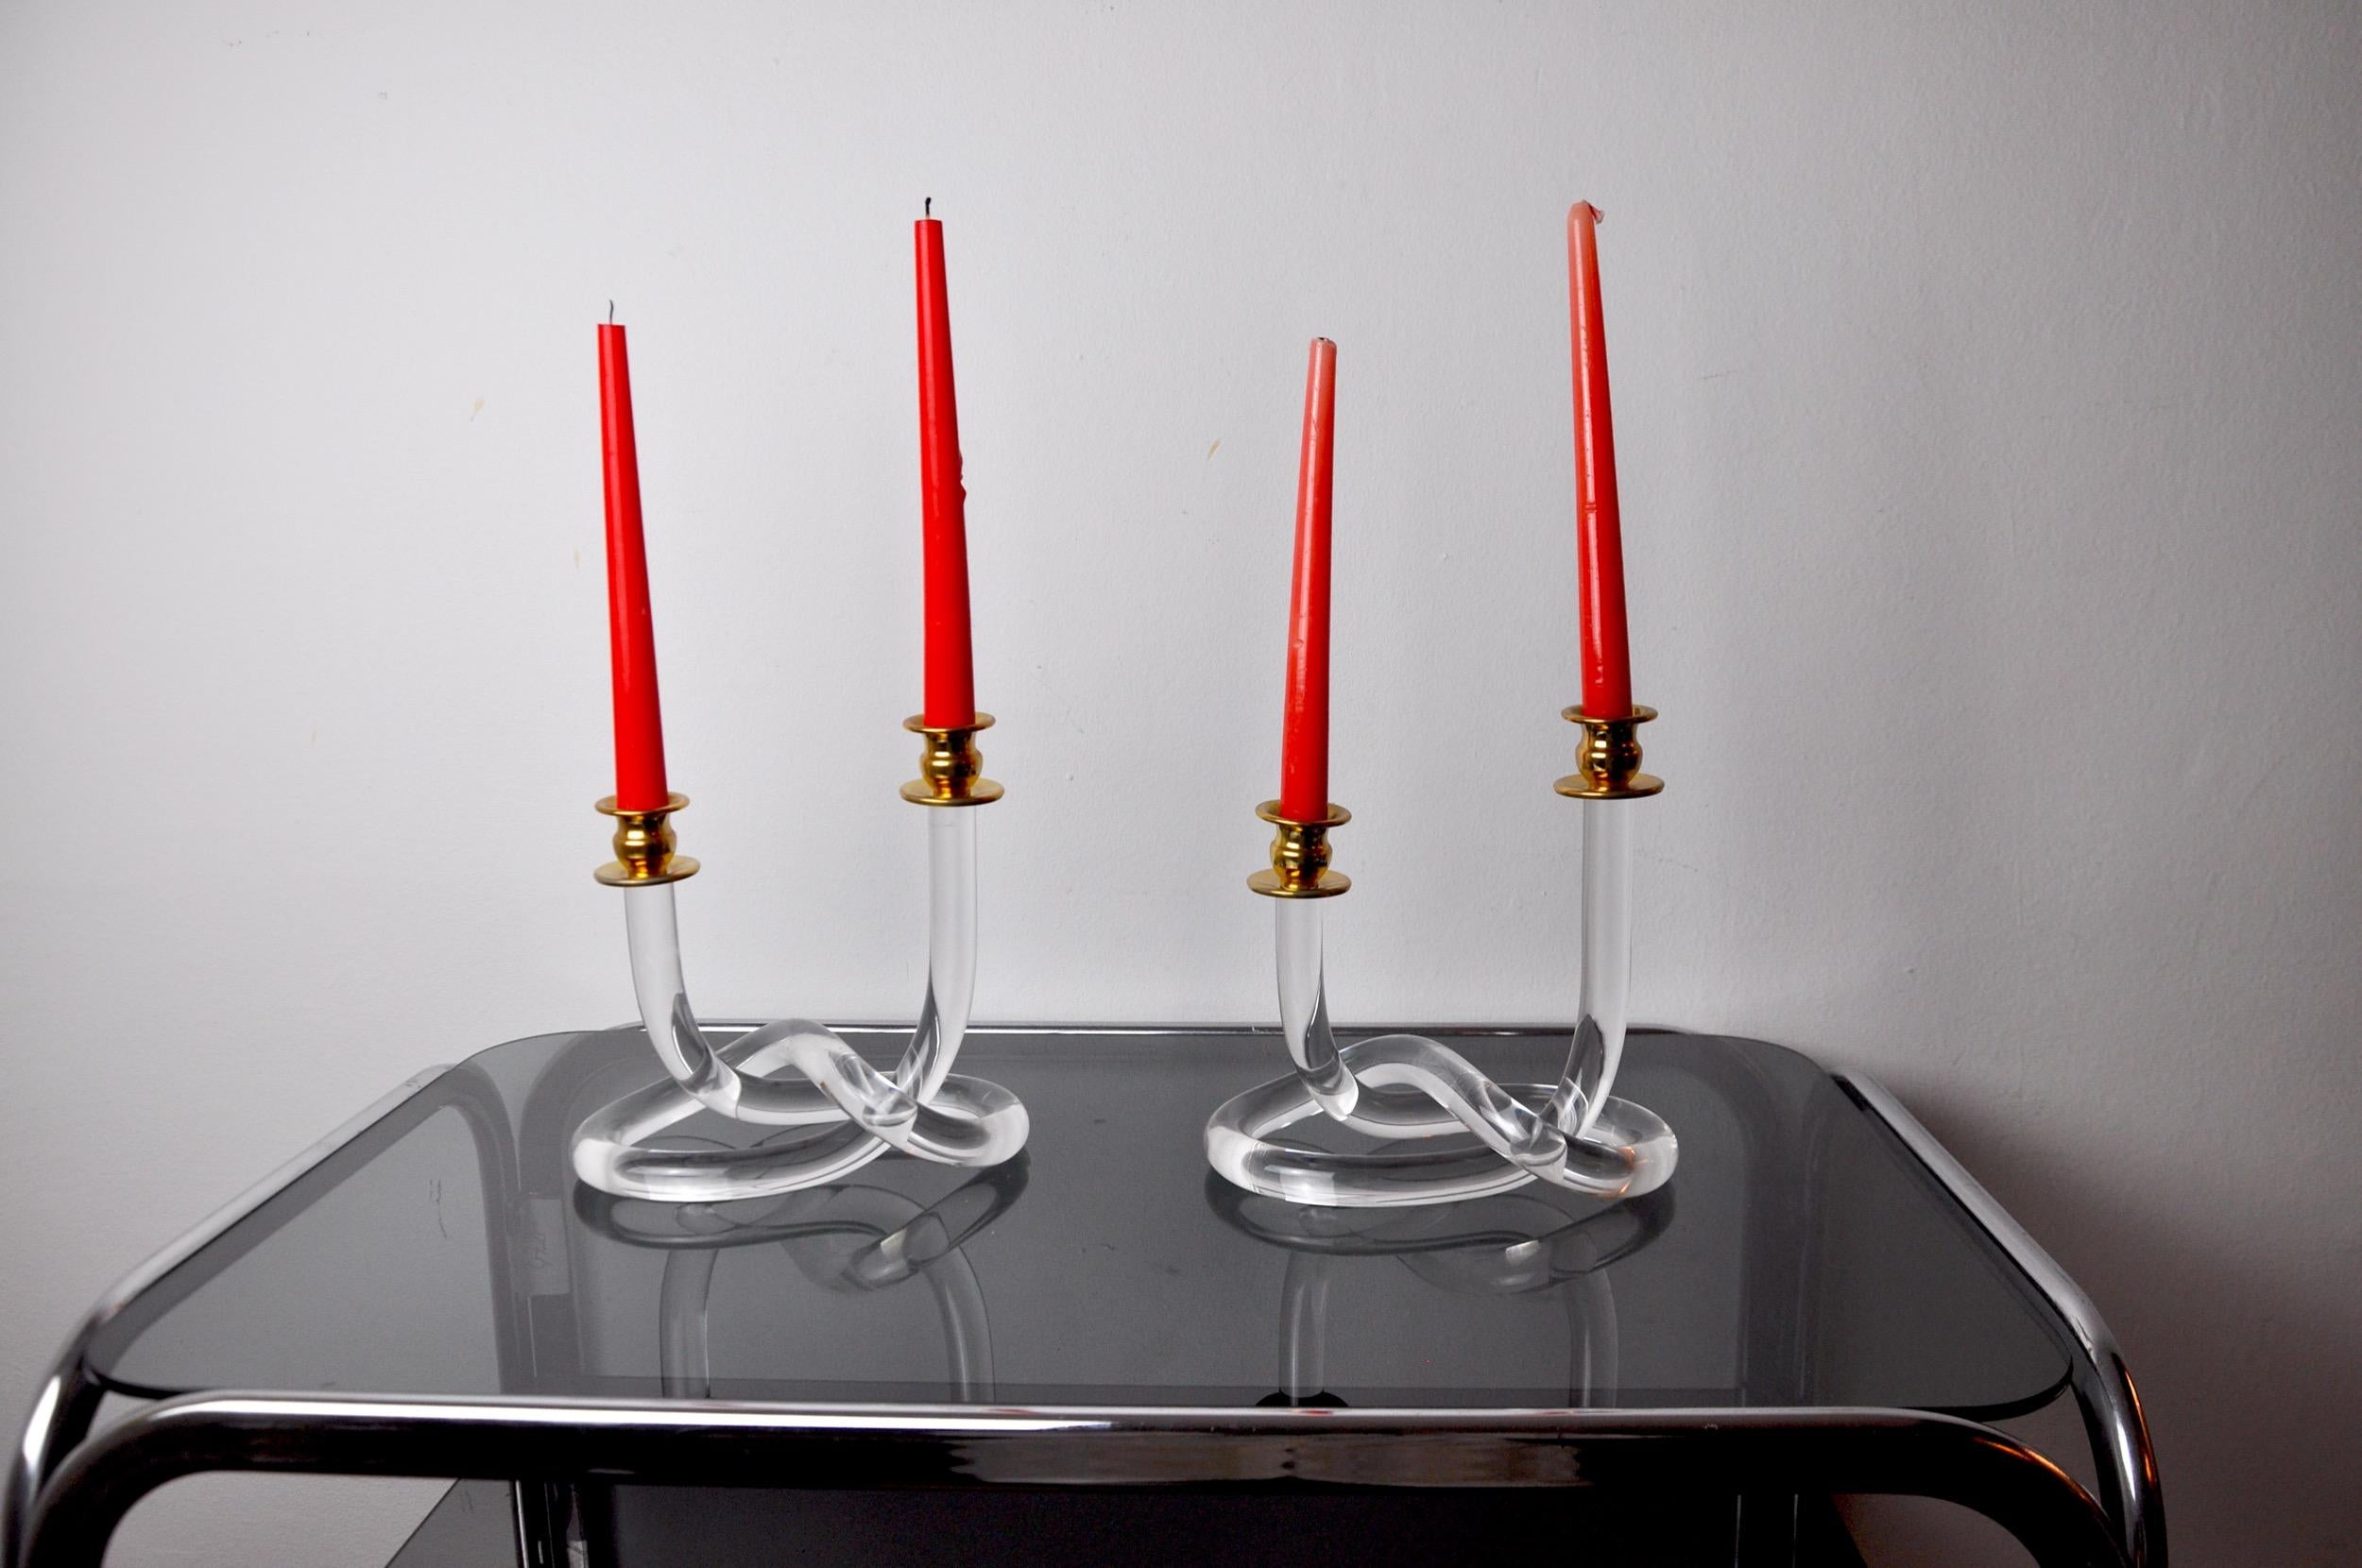 Pair of Dorothy Thorpe lucite candlesticks designed and produced in the 1970s.

Golden metal support and lucite in the shape of a pretzel designed by elaine bscheider.

Beautiful decorative objects that will bring a real design touch to your